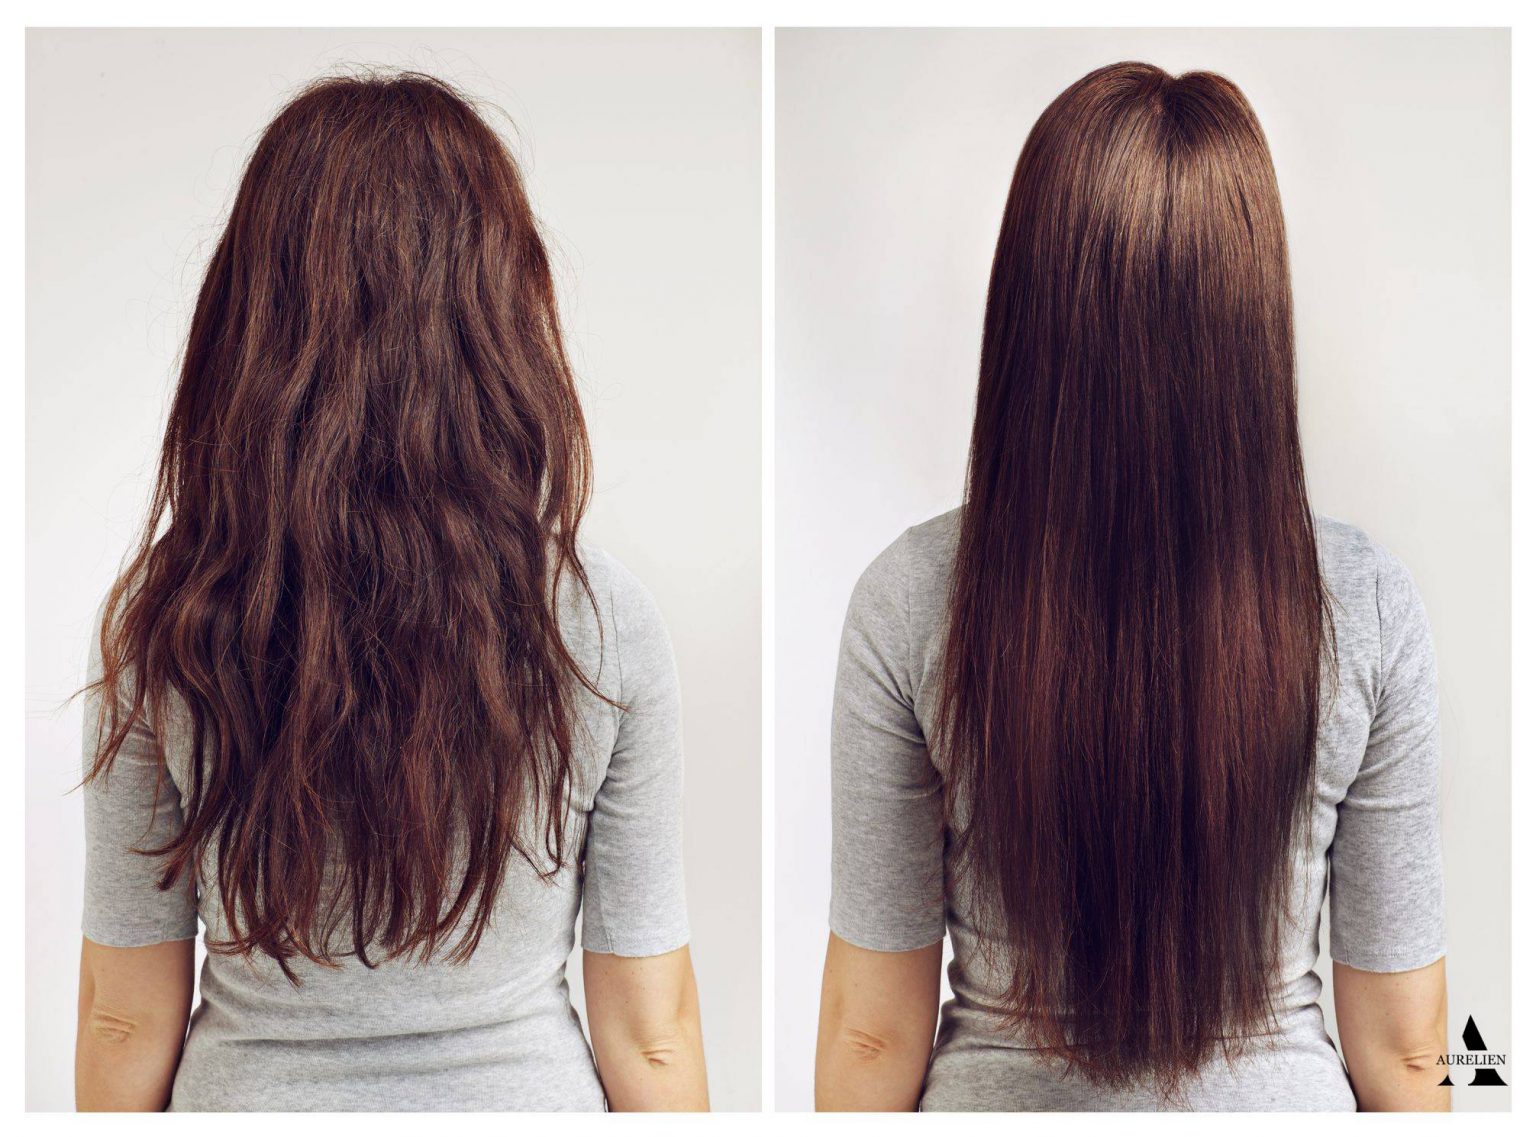 10. The Difference Between Straightened and Naturally Straight Dirty Blonde Hair - wide 4